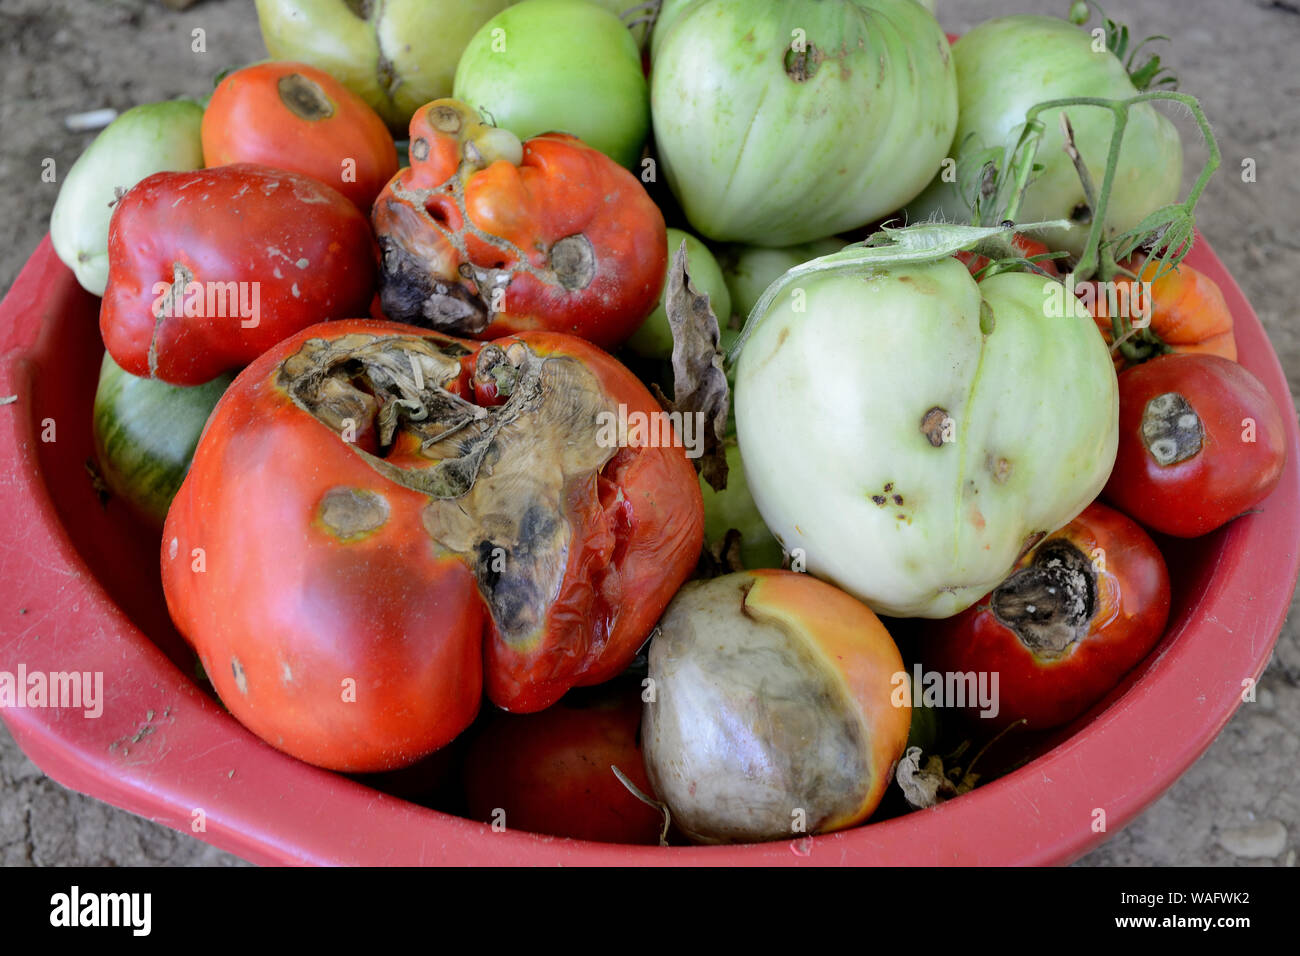 Bowl full of various types of tomato fruits with diseases, Phytophthora infestans Stock Photo